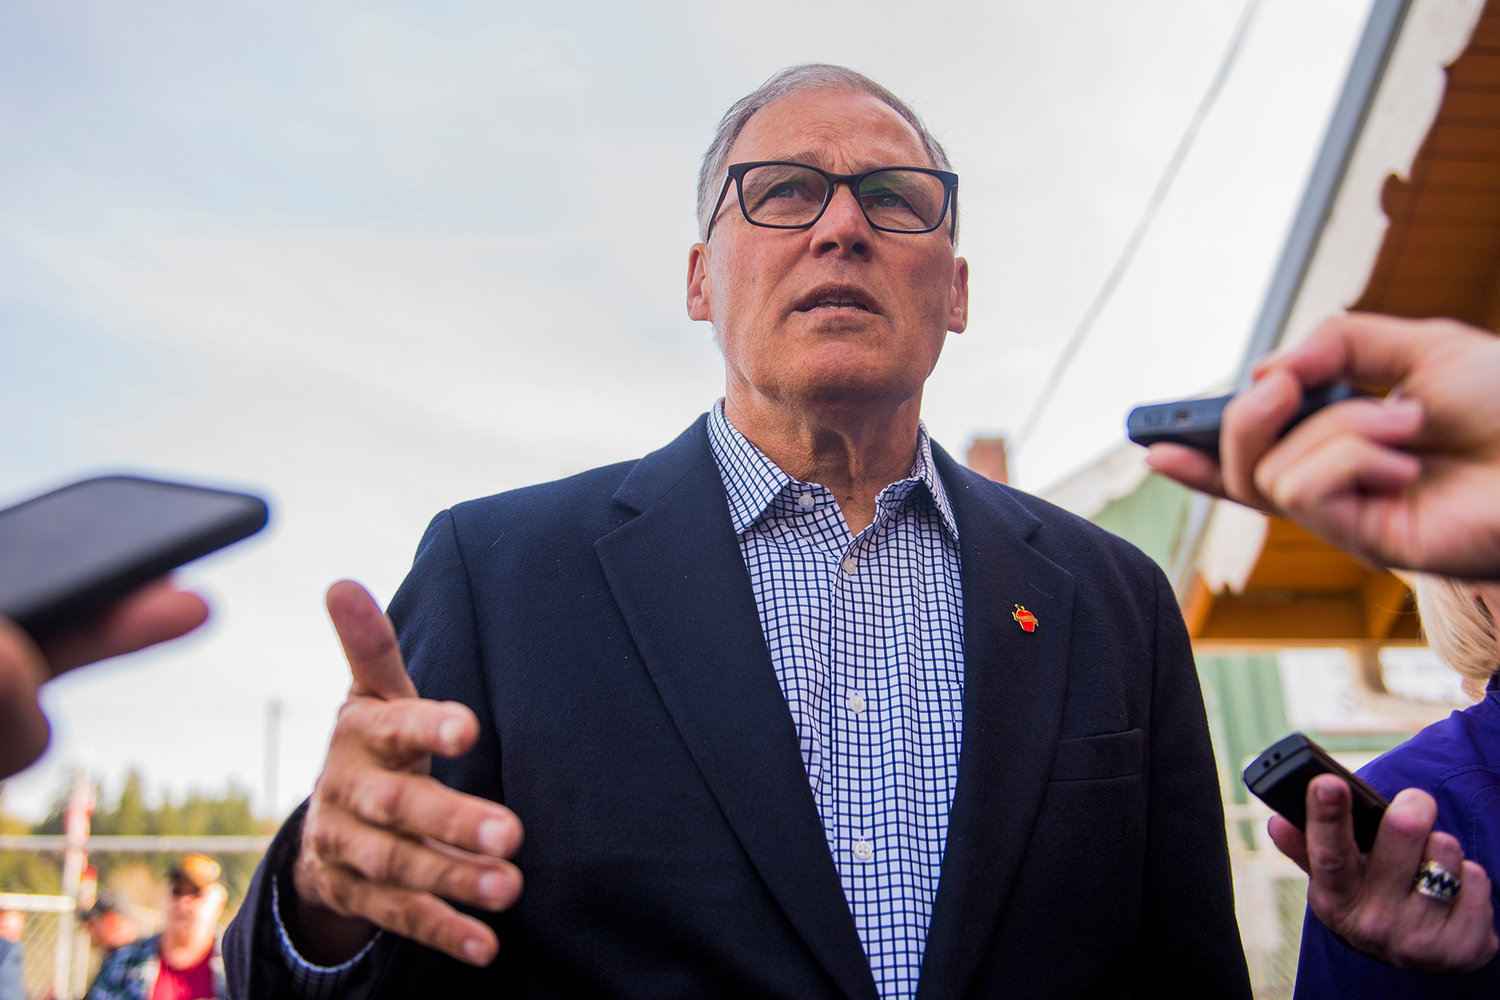 Governor Jay Inslee talks during a press conference at the Southwest Washington Fairgrounds in Chehalis in 2019.